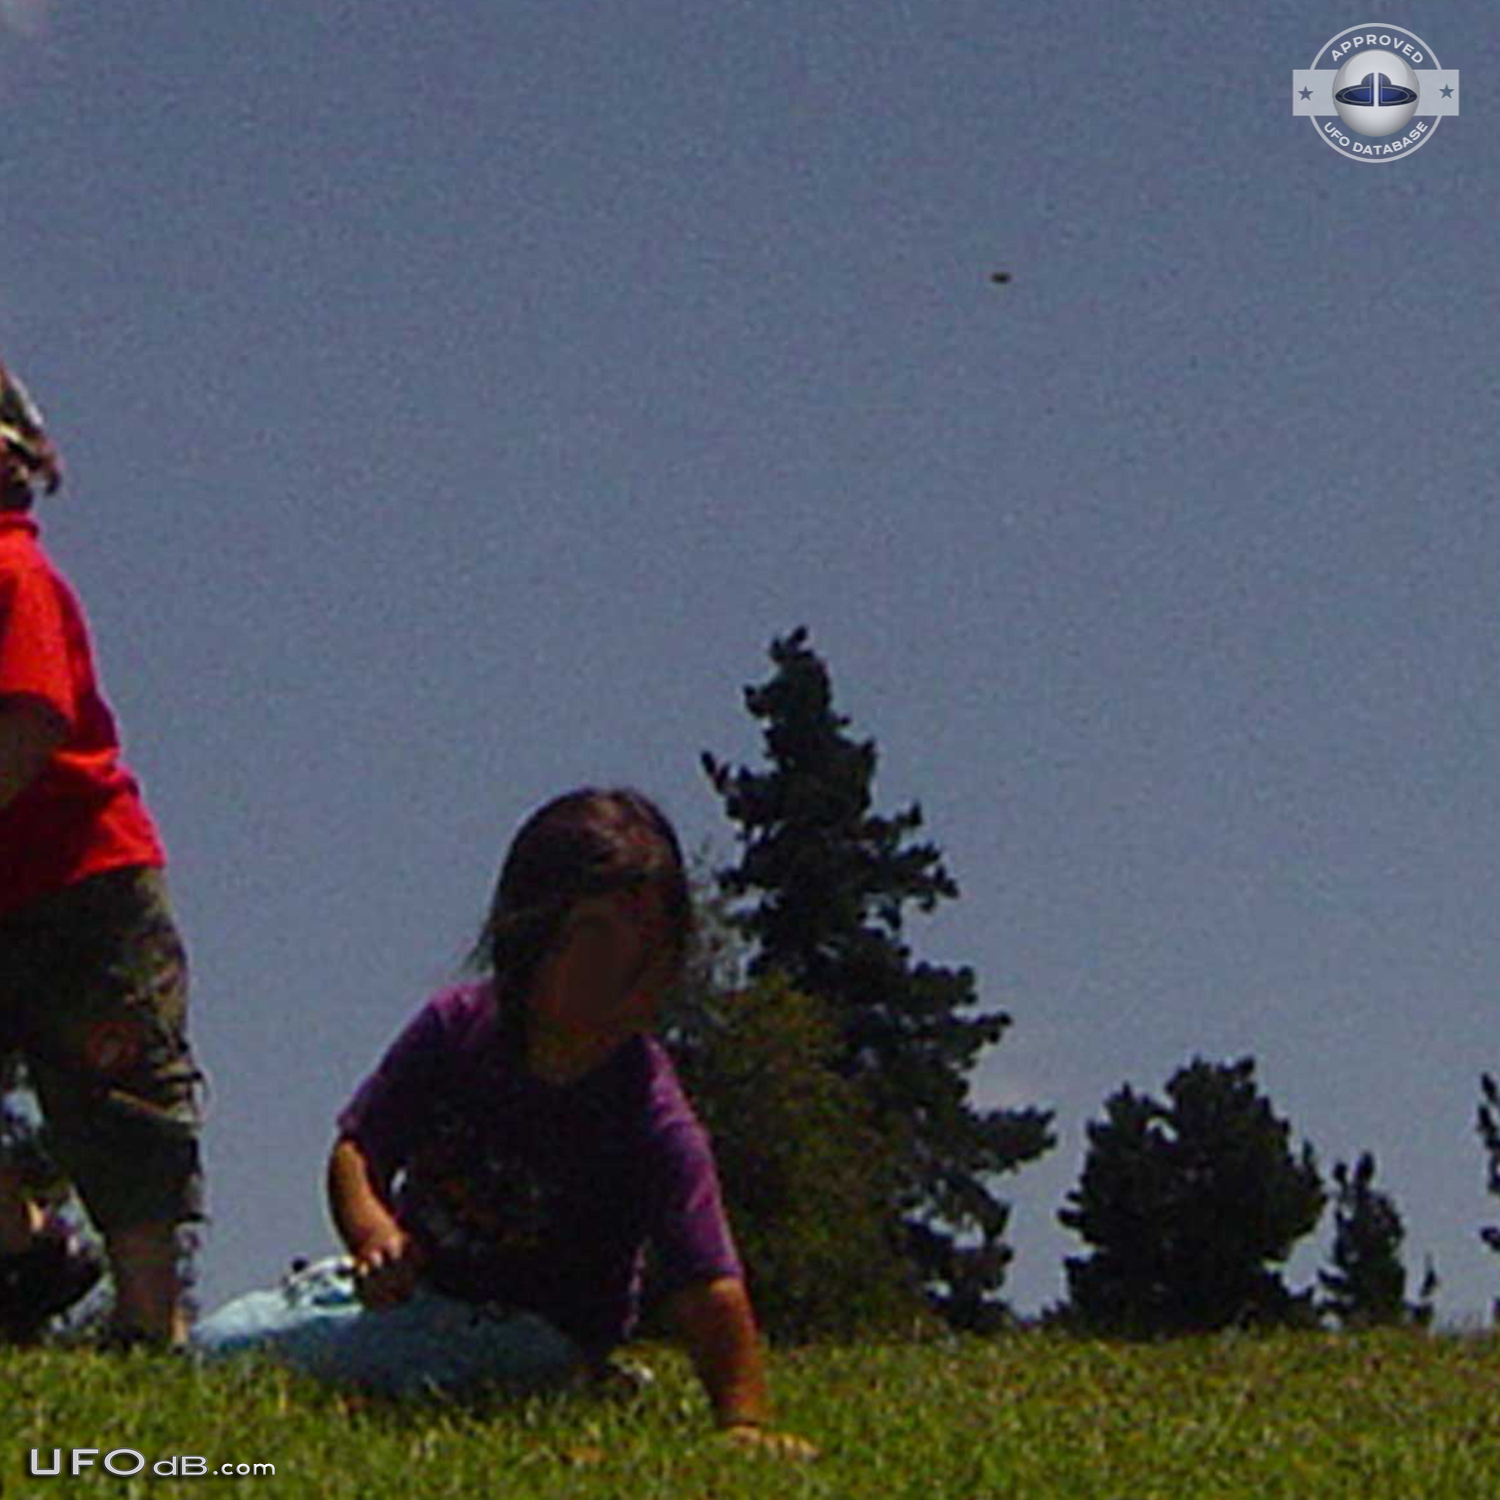 Kids picture captures a passing UFO in the sky of Cayo Chile in 2007 UFO Picture #435-2